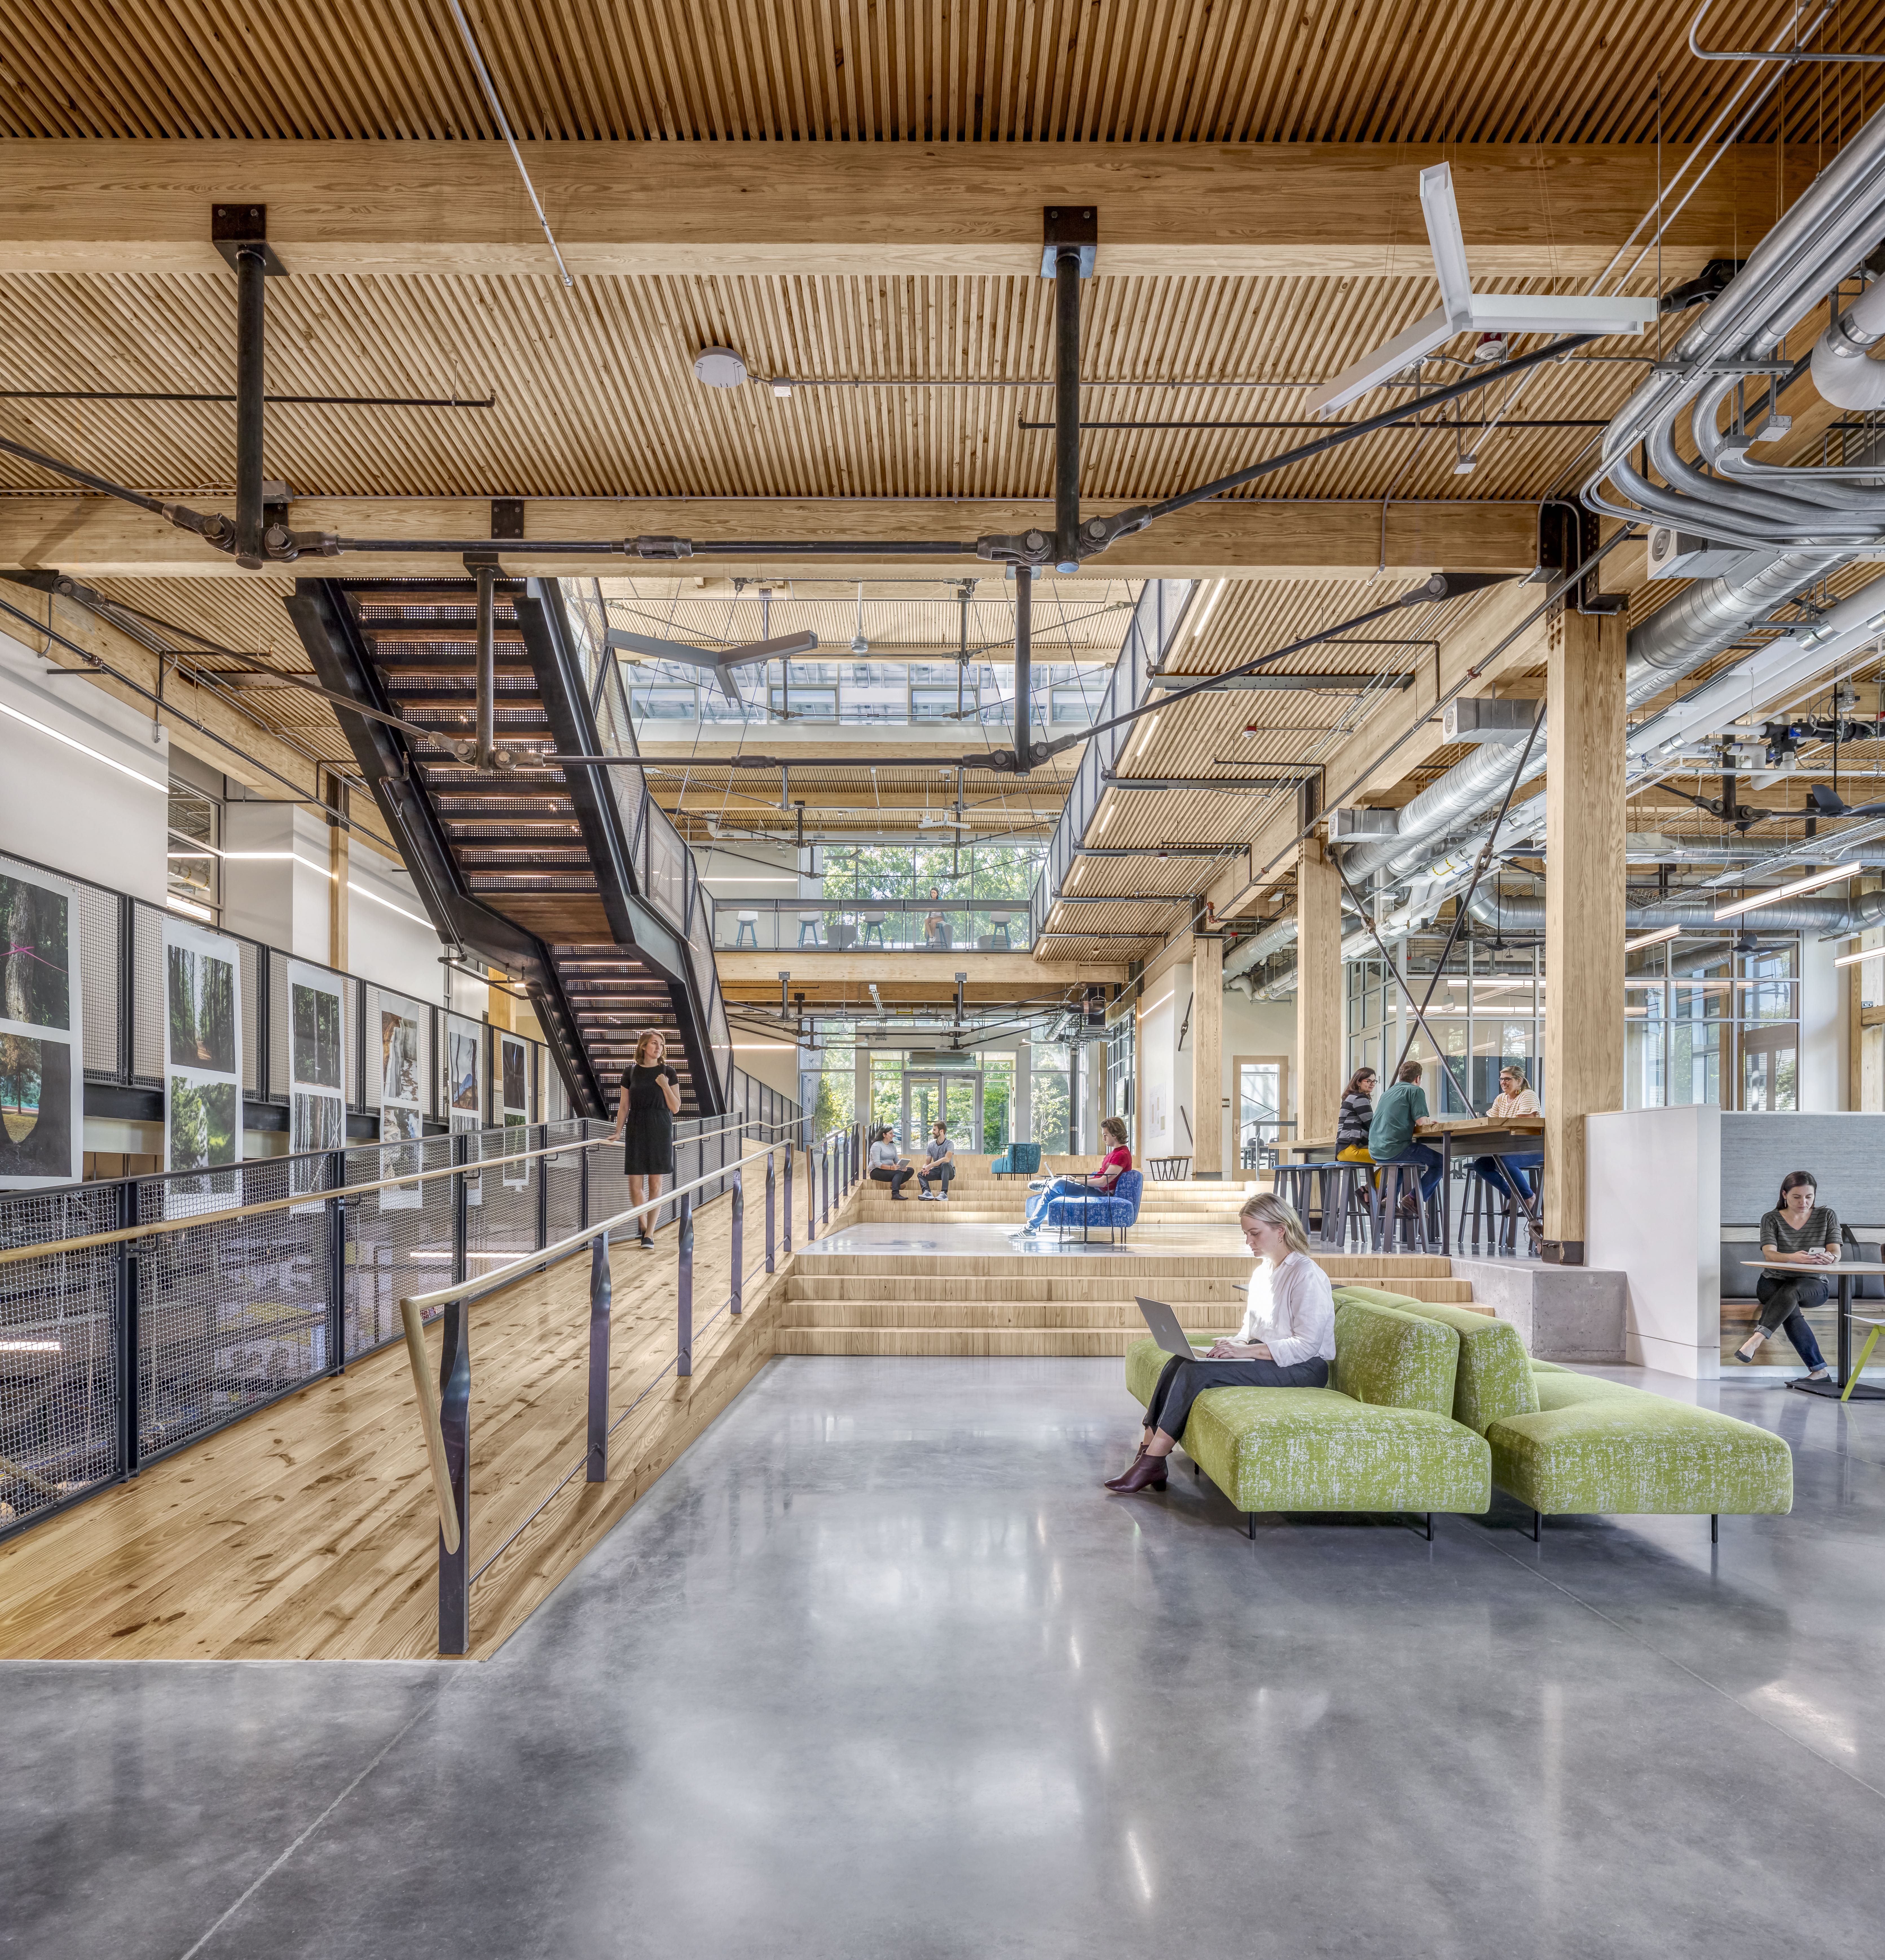 The building allows for ample natural lighting and provides views to the outdoors, as well as operable windows for fresh air. Photo Credit: Jonathan Hillyer.